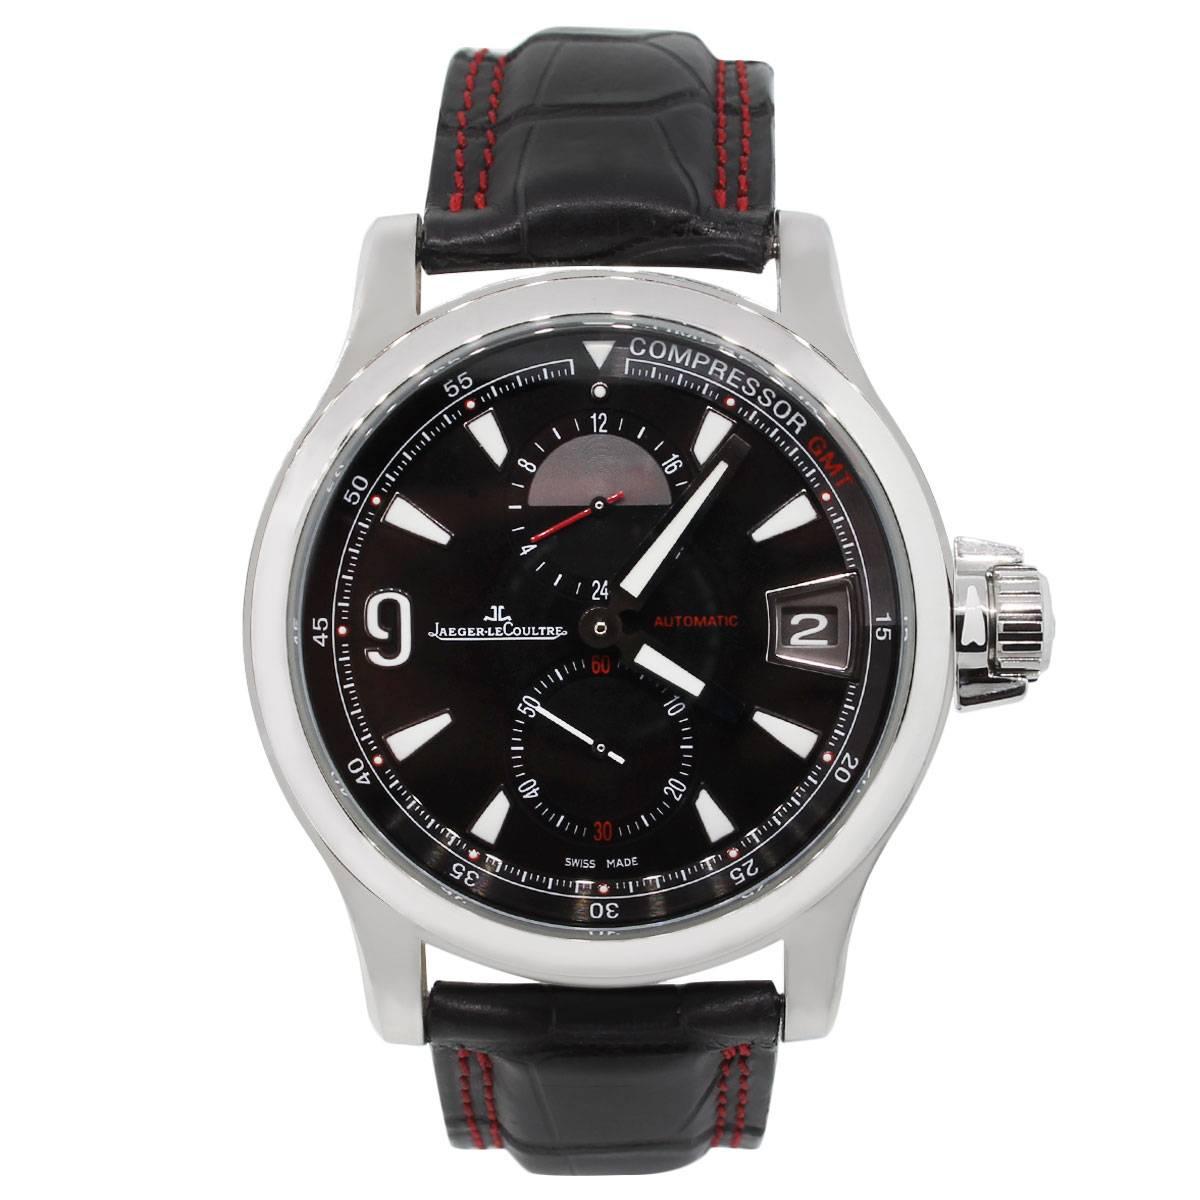 Brand: Jaeger LeCoultre
Model: Master Compressor
Case Material: Stainless steel
Case Diameter: 42mm
Crystal: Sapphire
Bezel: Smooth fixed stainless steel bezel
Dial: Black dial with date indicated at 3 o' clock with second timezone feature and